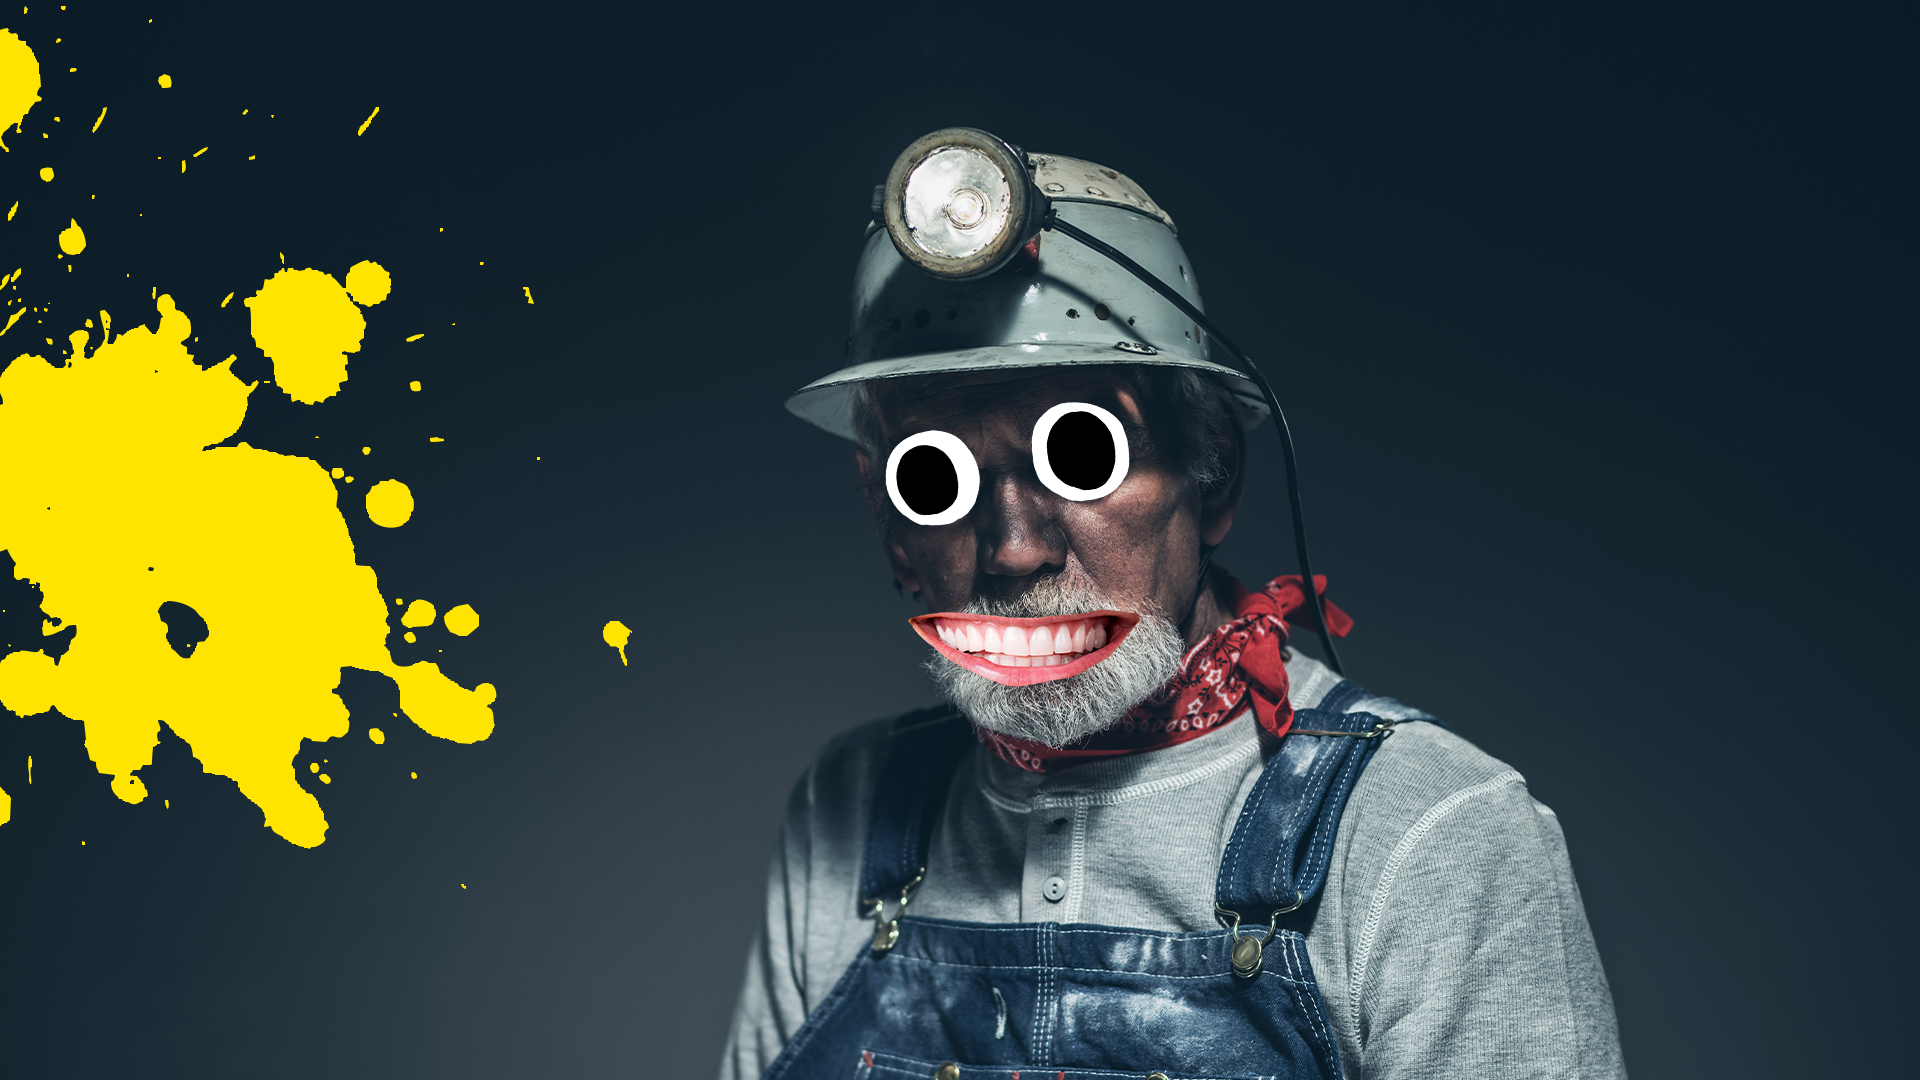 A guy in dungarees and hard hat grinning on grey background with yellow splat 